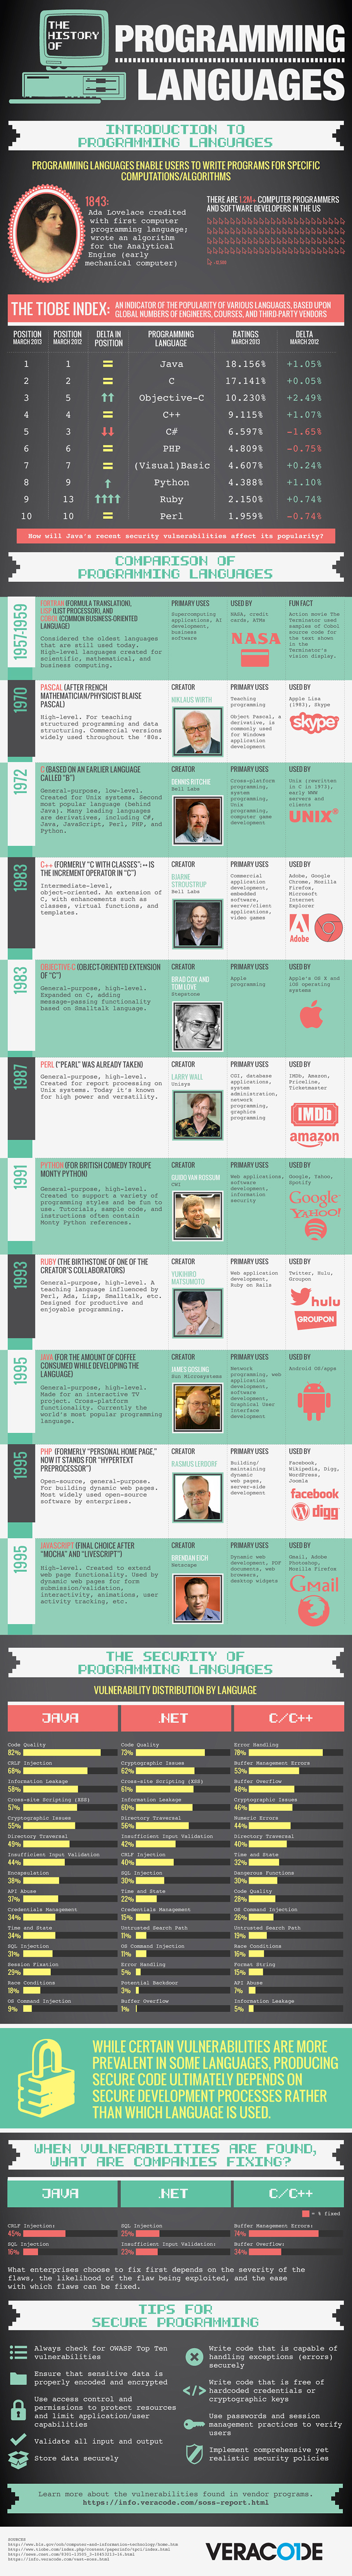 The History of Programming Languages Infographic